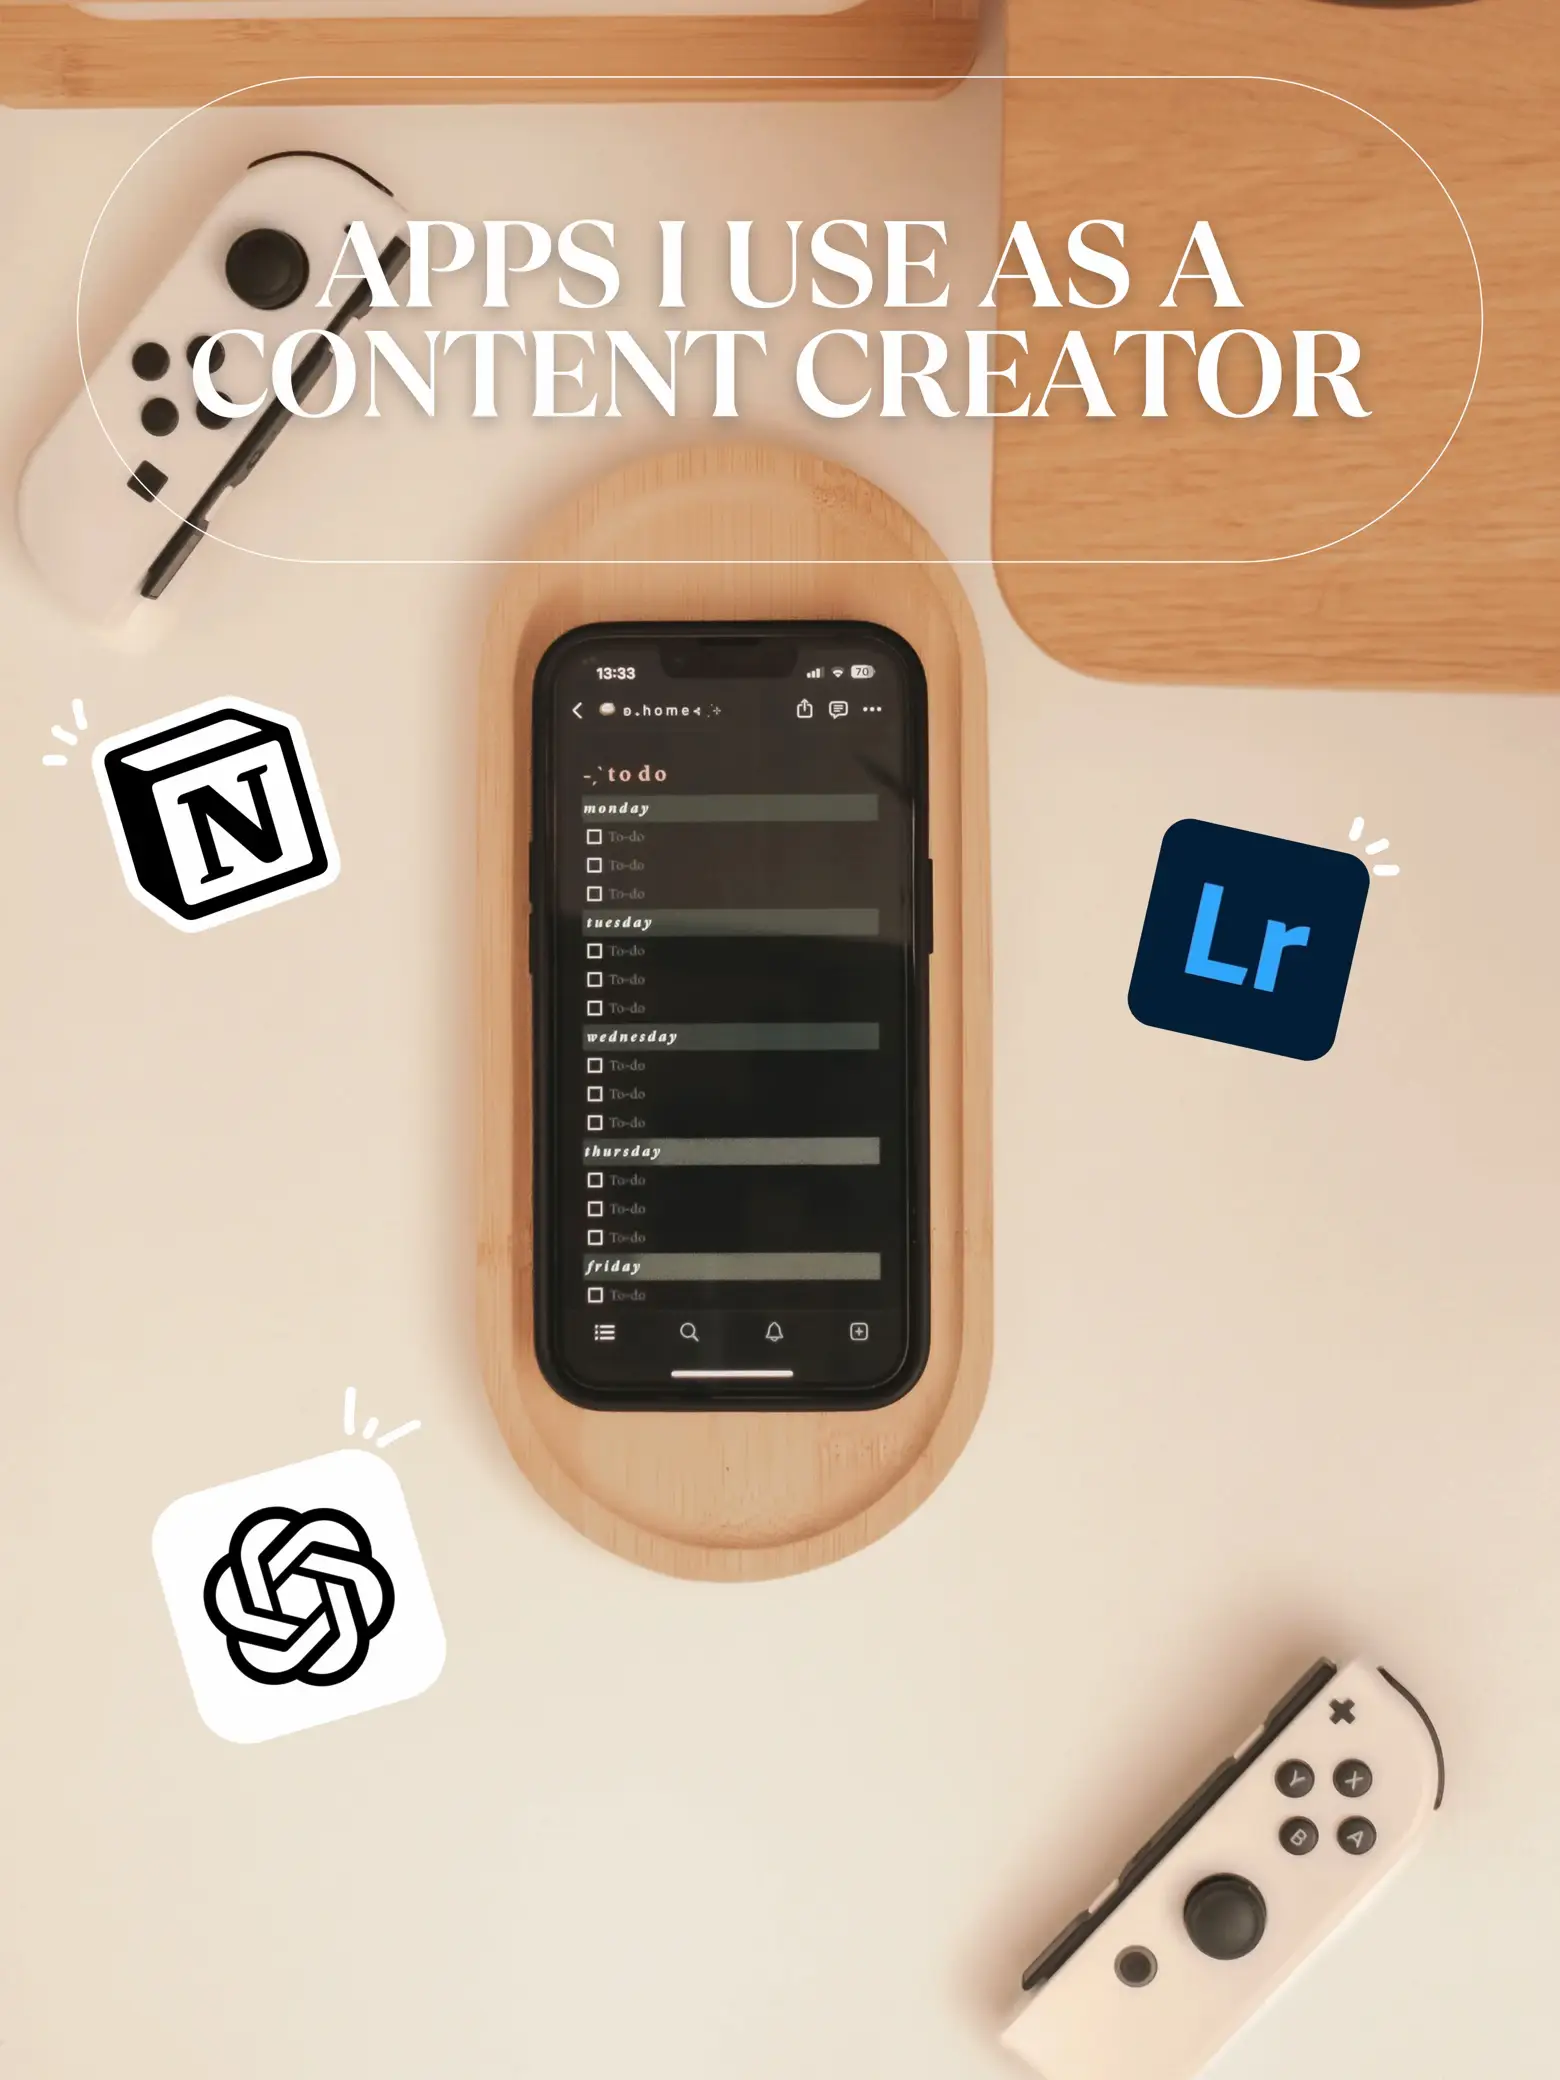 Apps i use as a Content Creator! 🌱's images